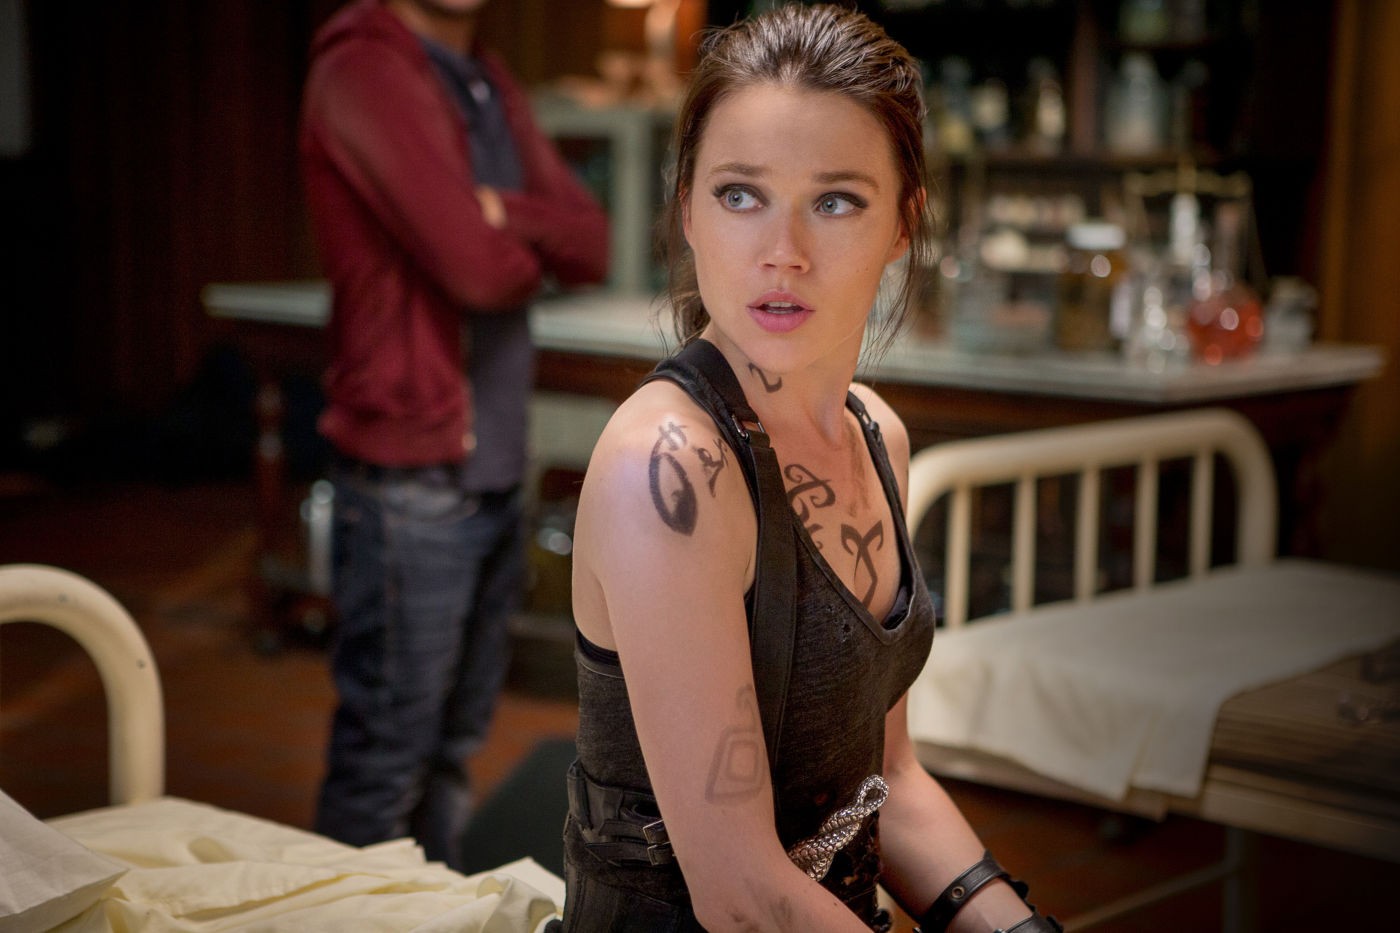 Jemima West stars as Isabelle Lightwood in Screen Gems' The Mortal Instruments: City of Bones (2013). Photo credit by Rafy.